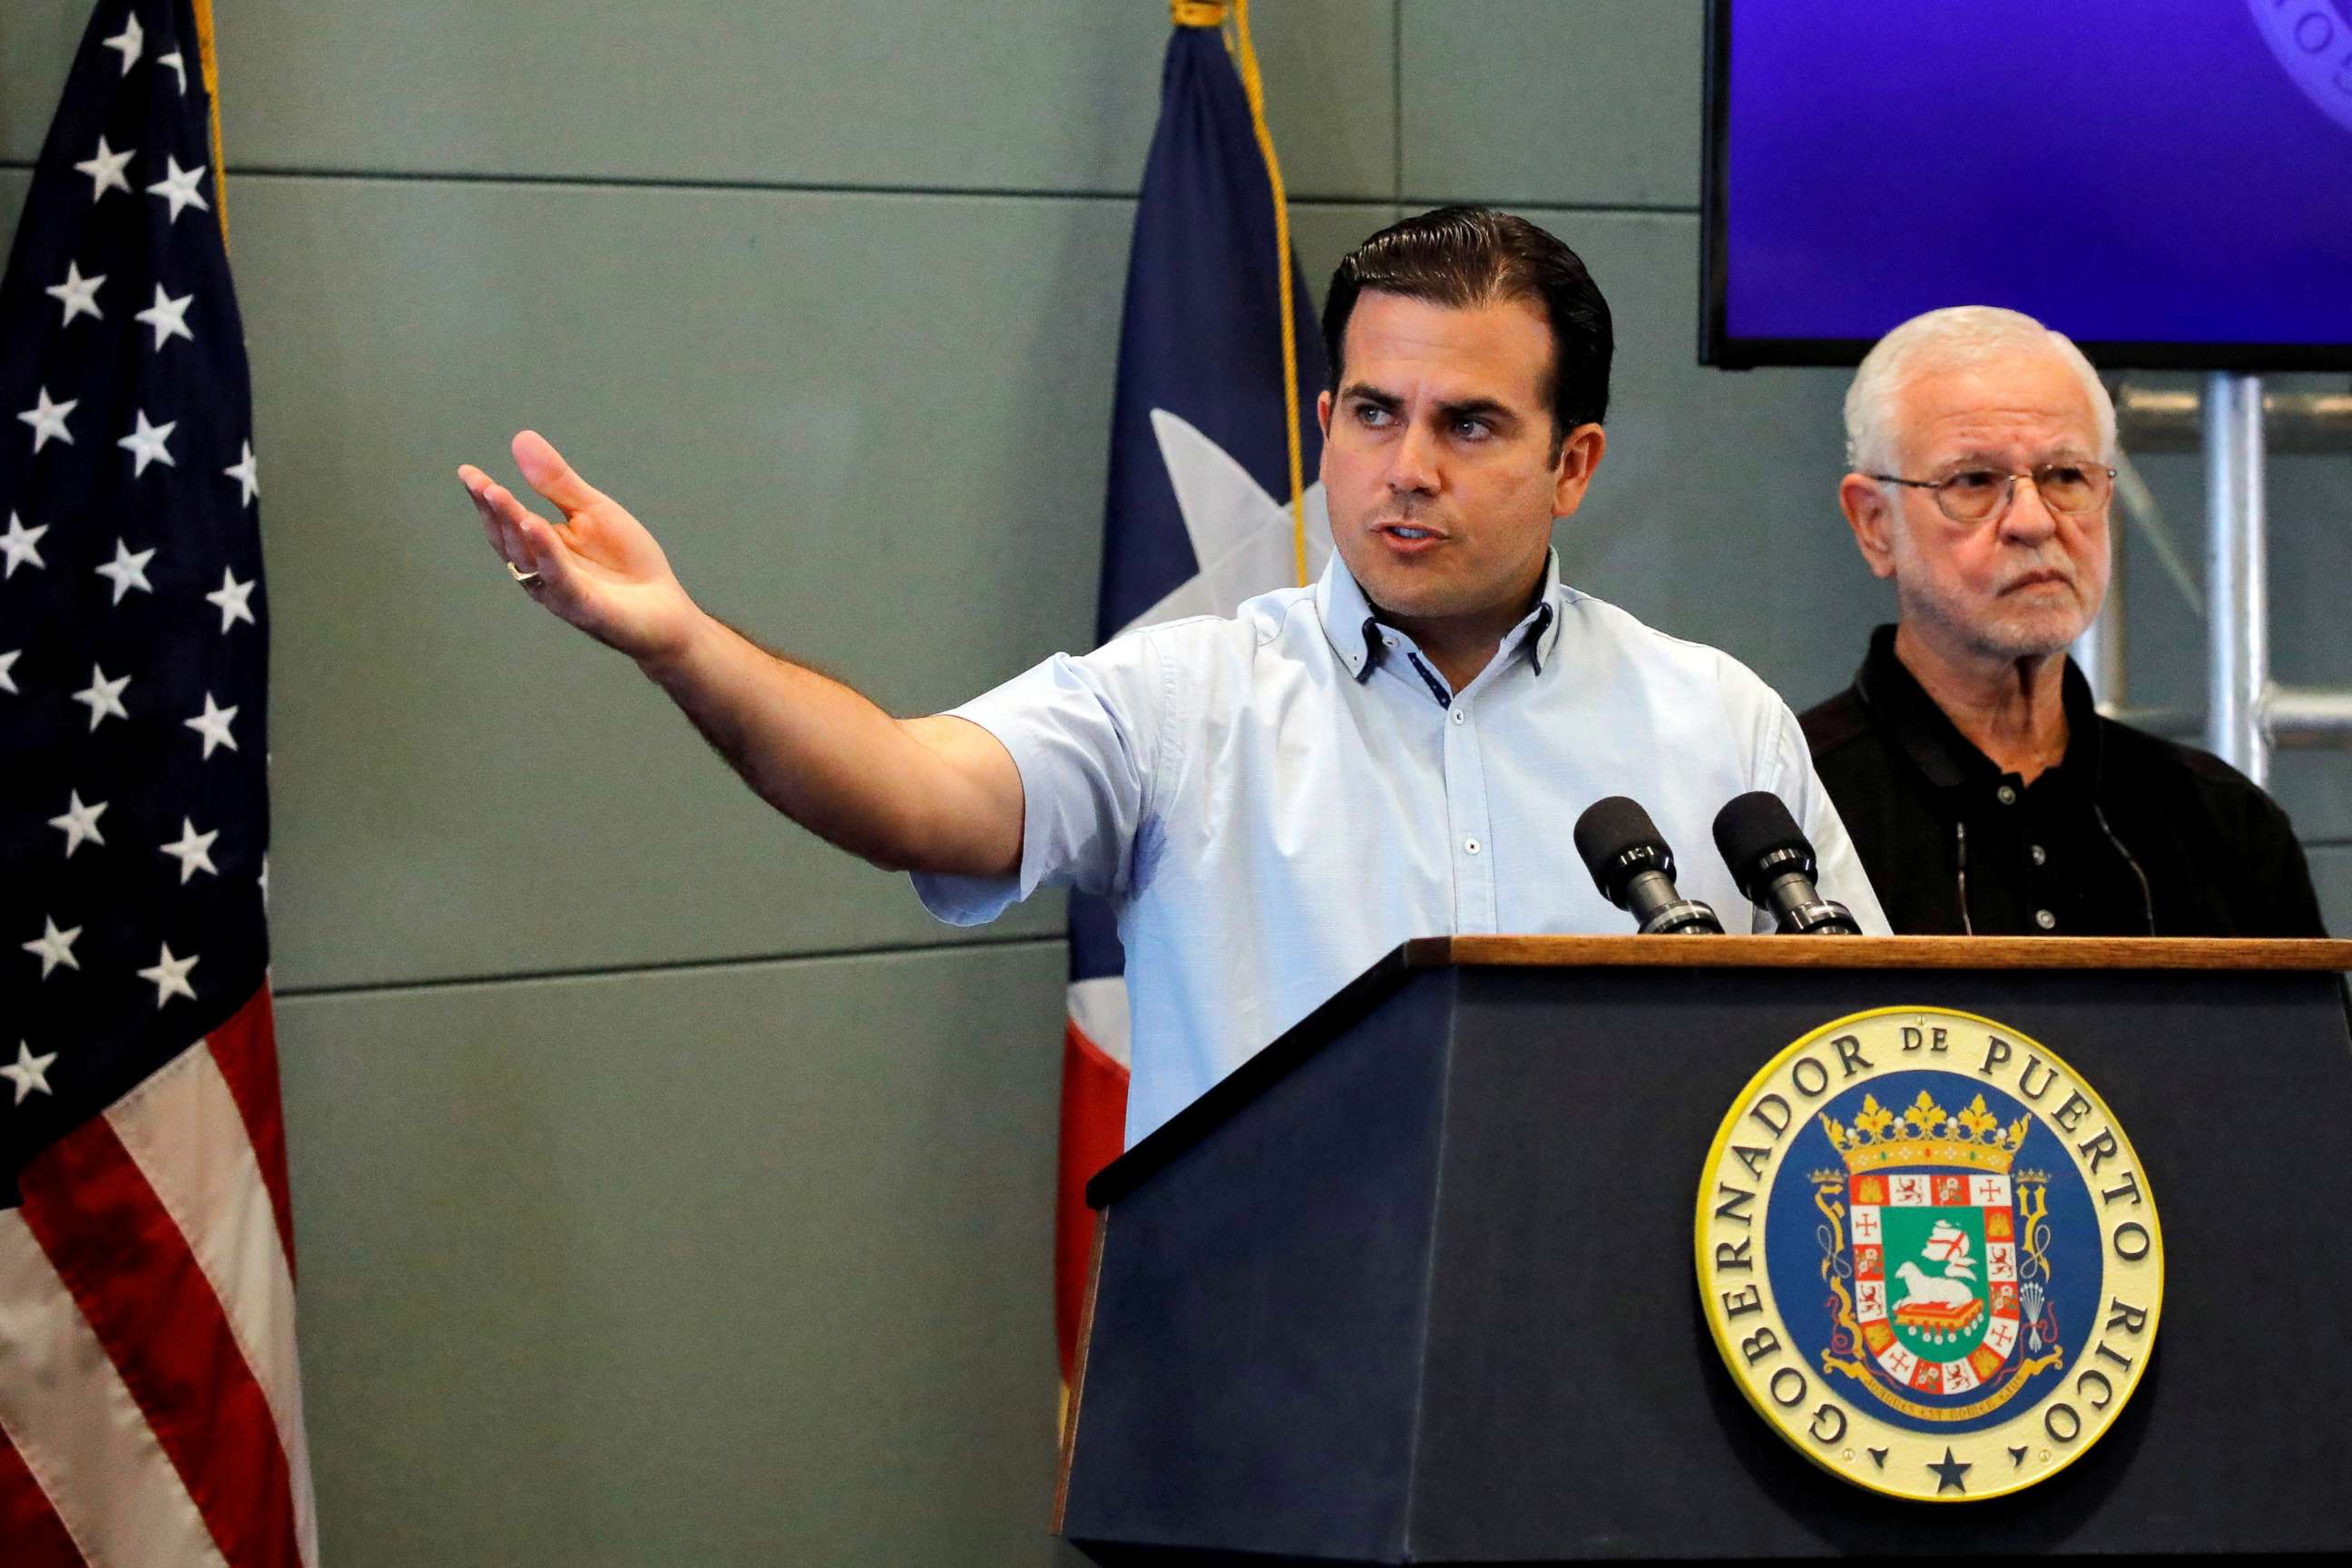 PHOTO: Governor of Puerto Rico Ricardo Rossello speaks during a news conference days after Hurricane Maria hit Puerto Rico, in San Juan, Puerto Rico, Sept. 30, 2017.